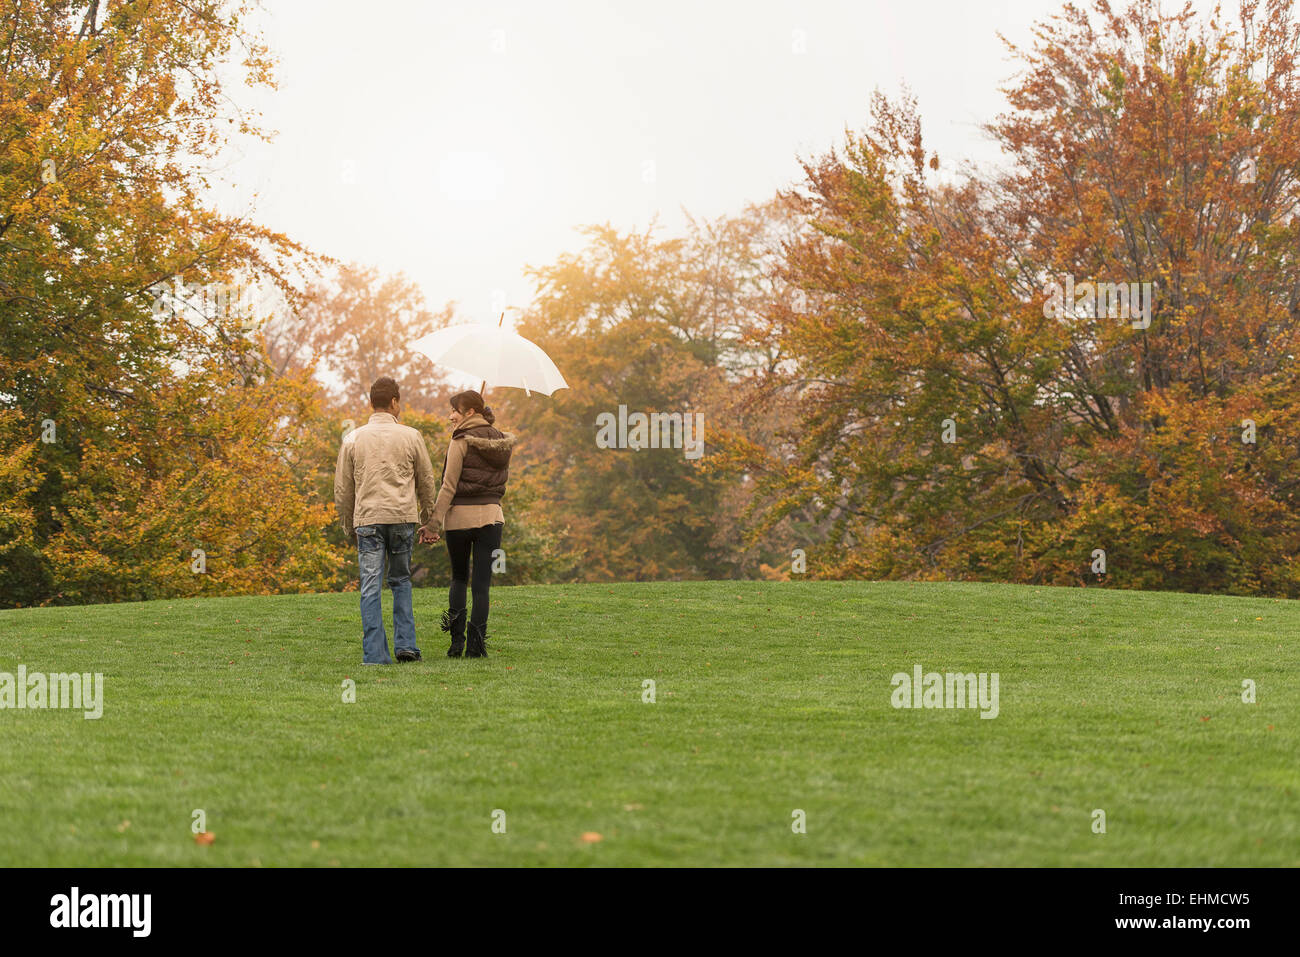 Couple walking with umbrella in park Banque D'Images